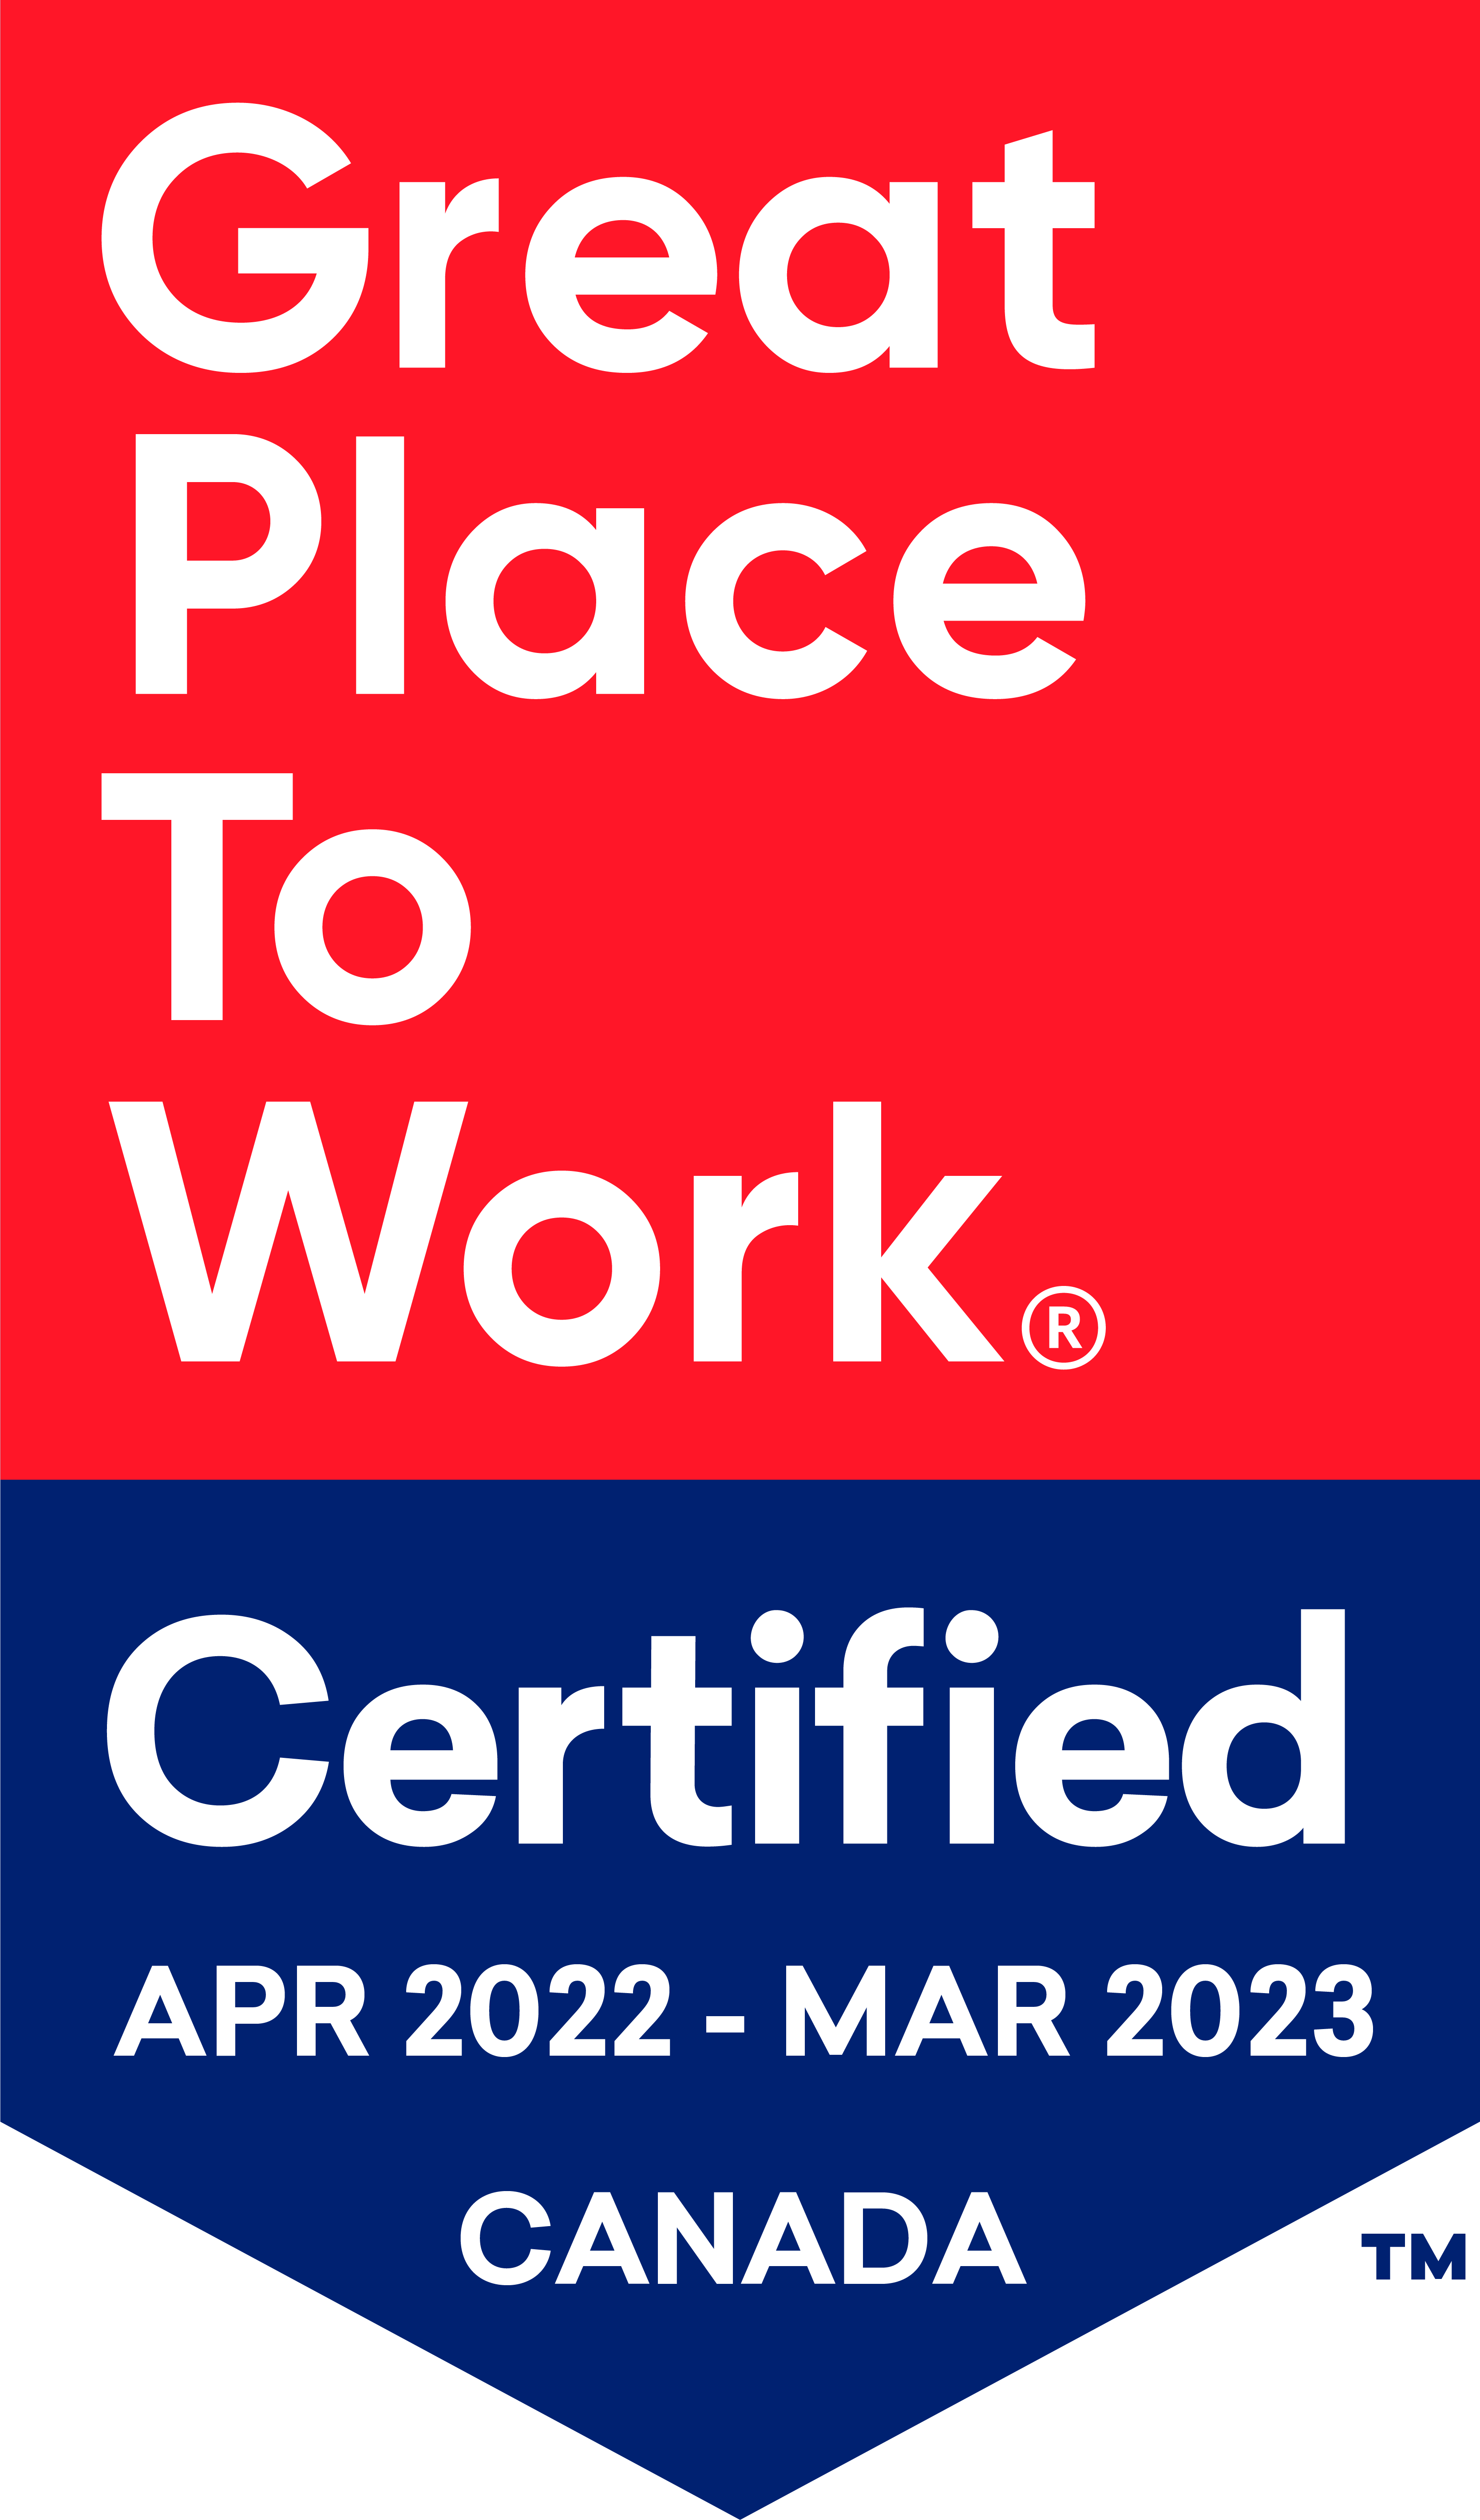 Great Place To Work Certified Canada April 2022